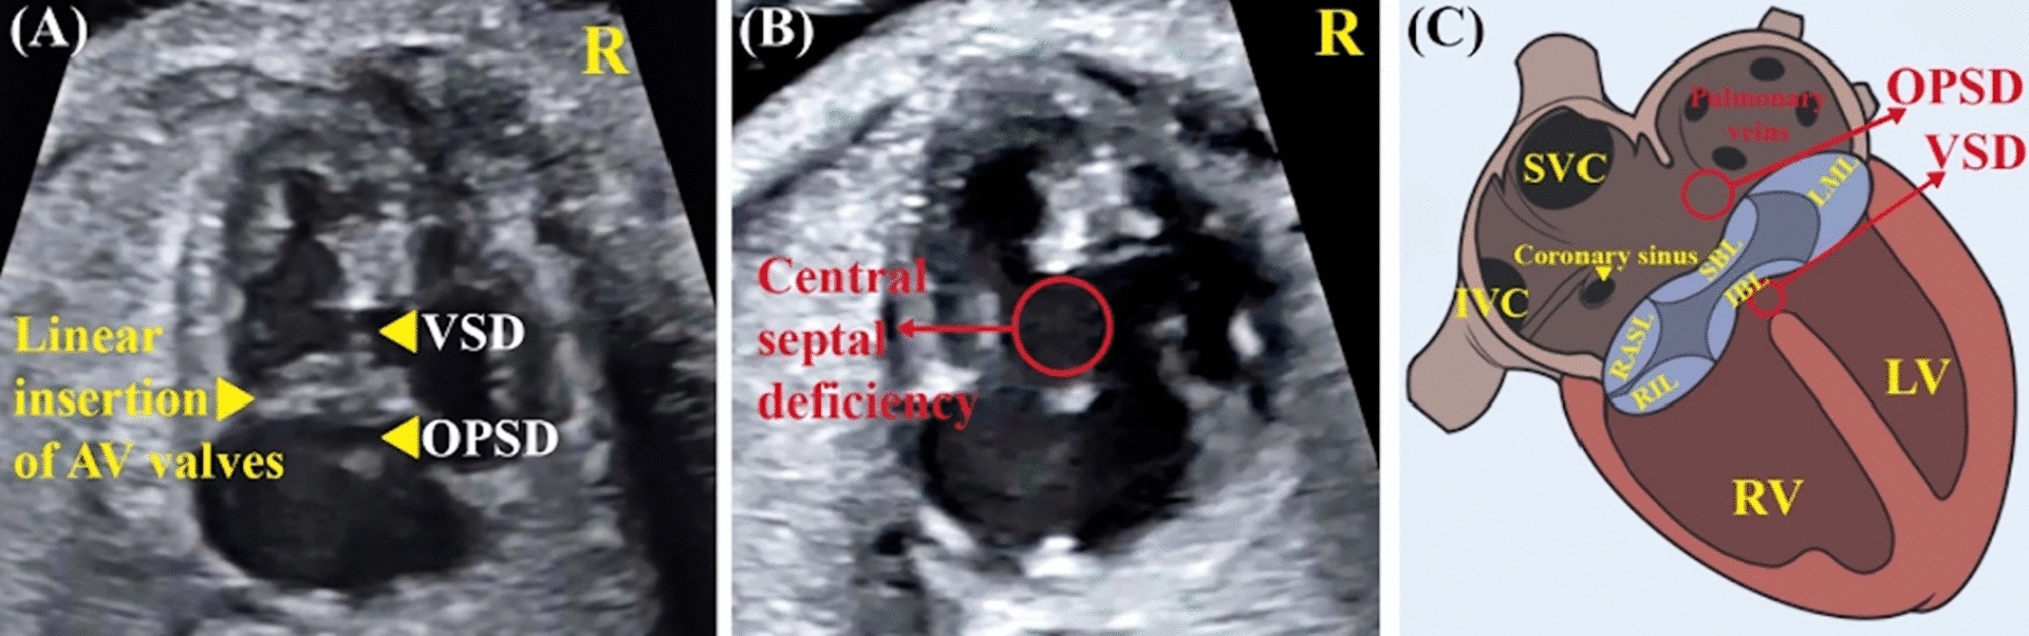 Revisiting Atrioventricular Septal Defects: Exploring Chromosomal Abnormalities, Cardiac and Extracardiac Anomalies in a Contemporary Prenatal Cohort